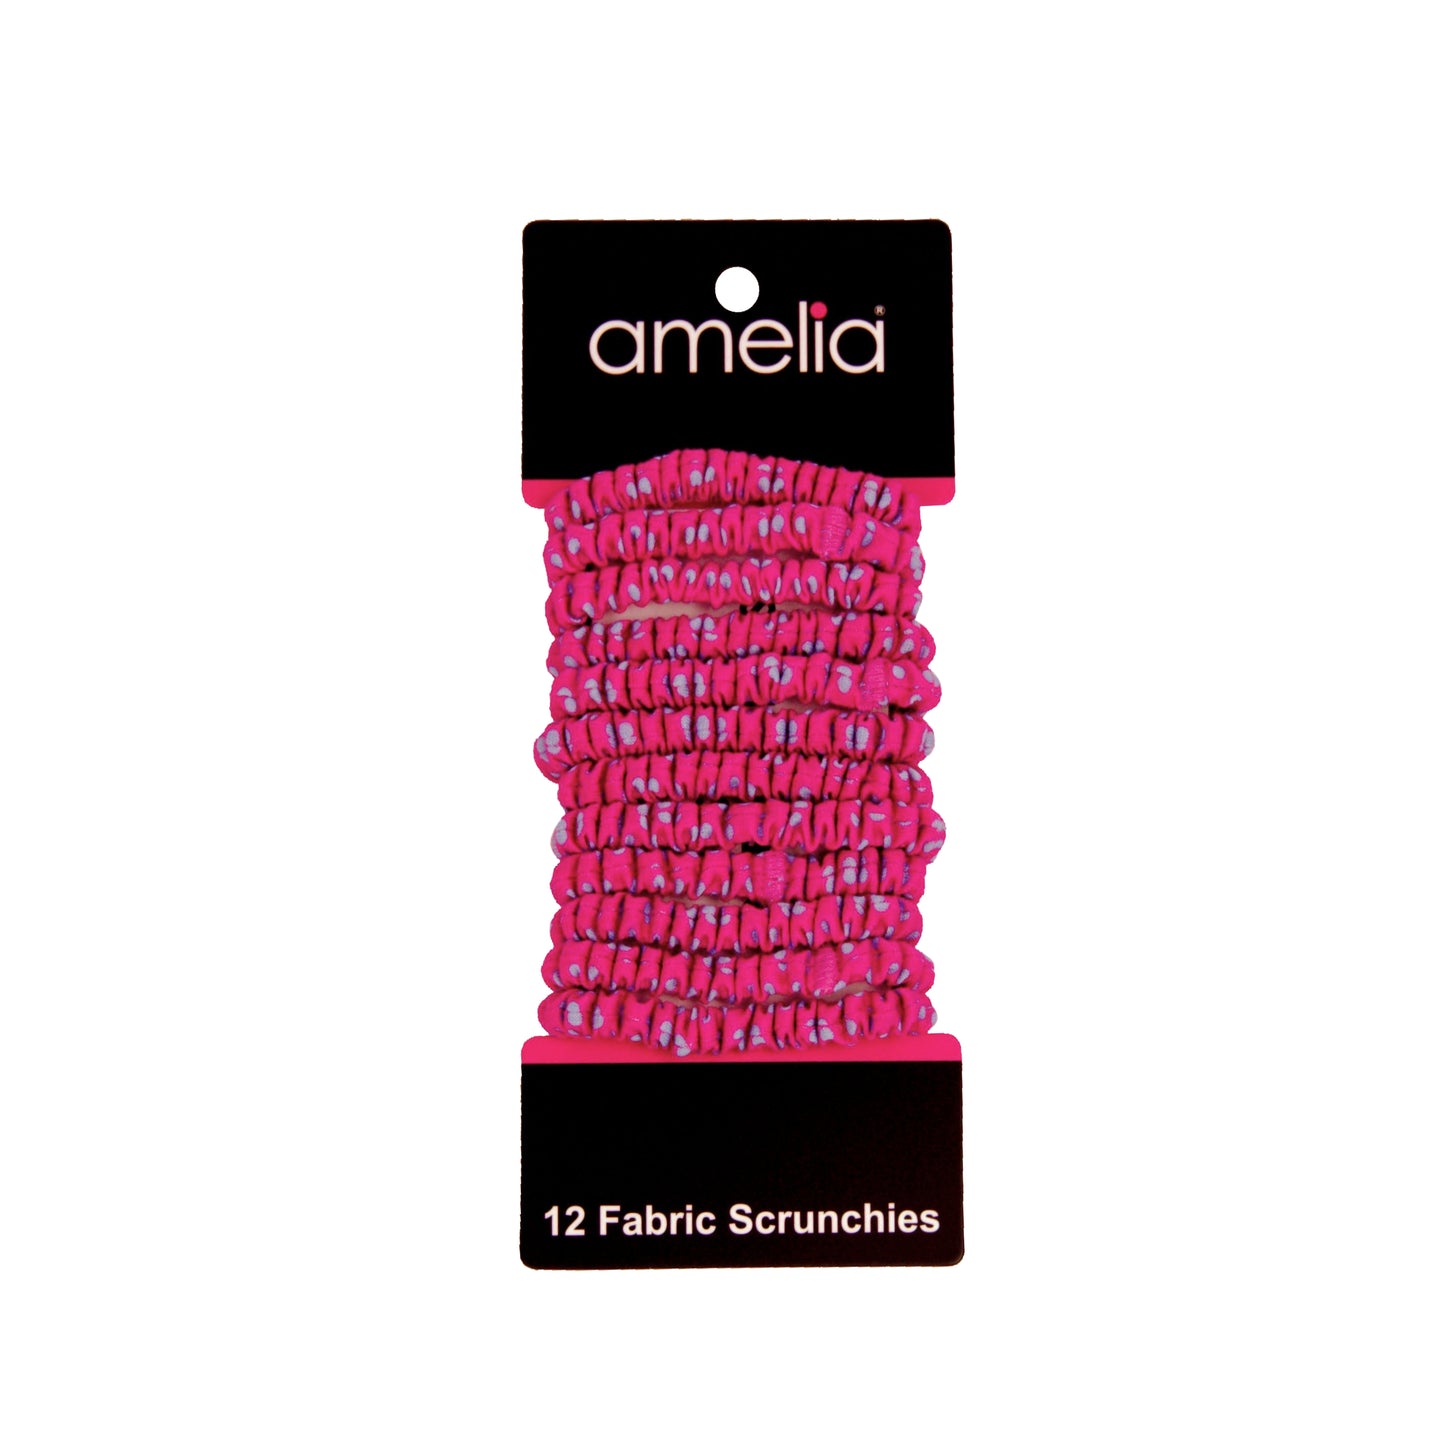 Amelia Beauty, Blue with Pink Dots Skinny Jersey Scrunchies, 2.125in Diameter, Gentle on Hair, Strong Hold, No Snag, No Dents or Creases. 12 Pack